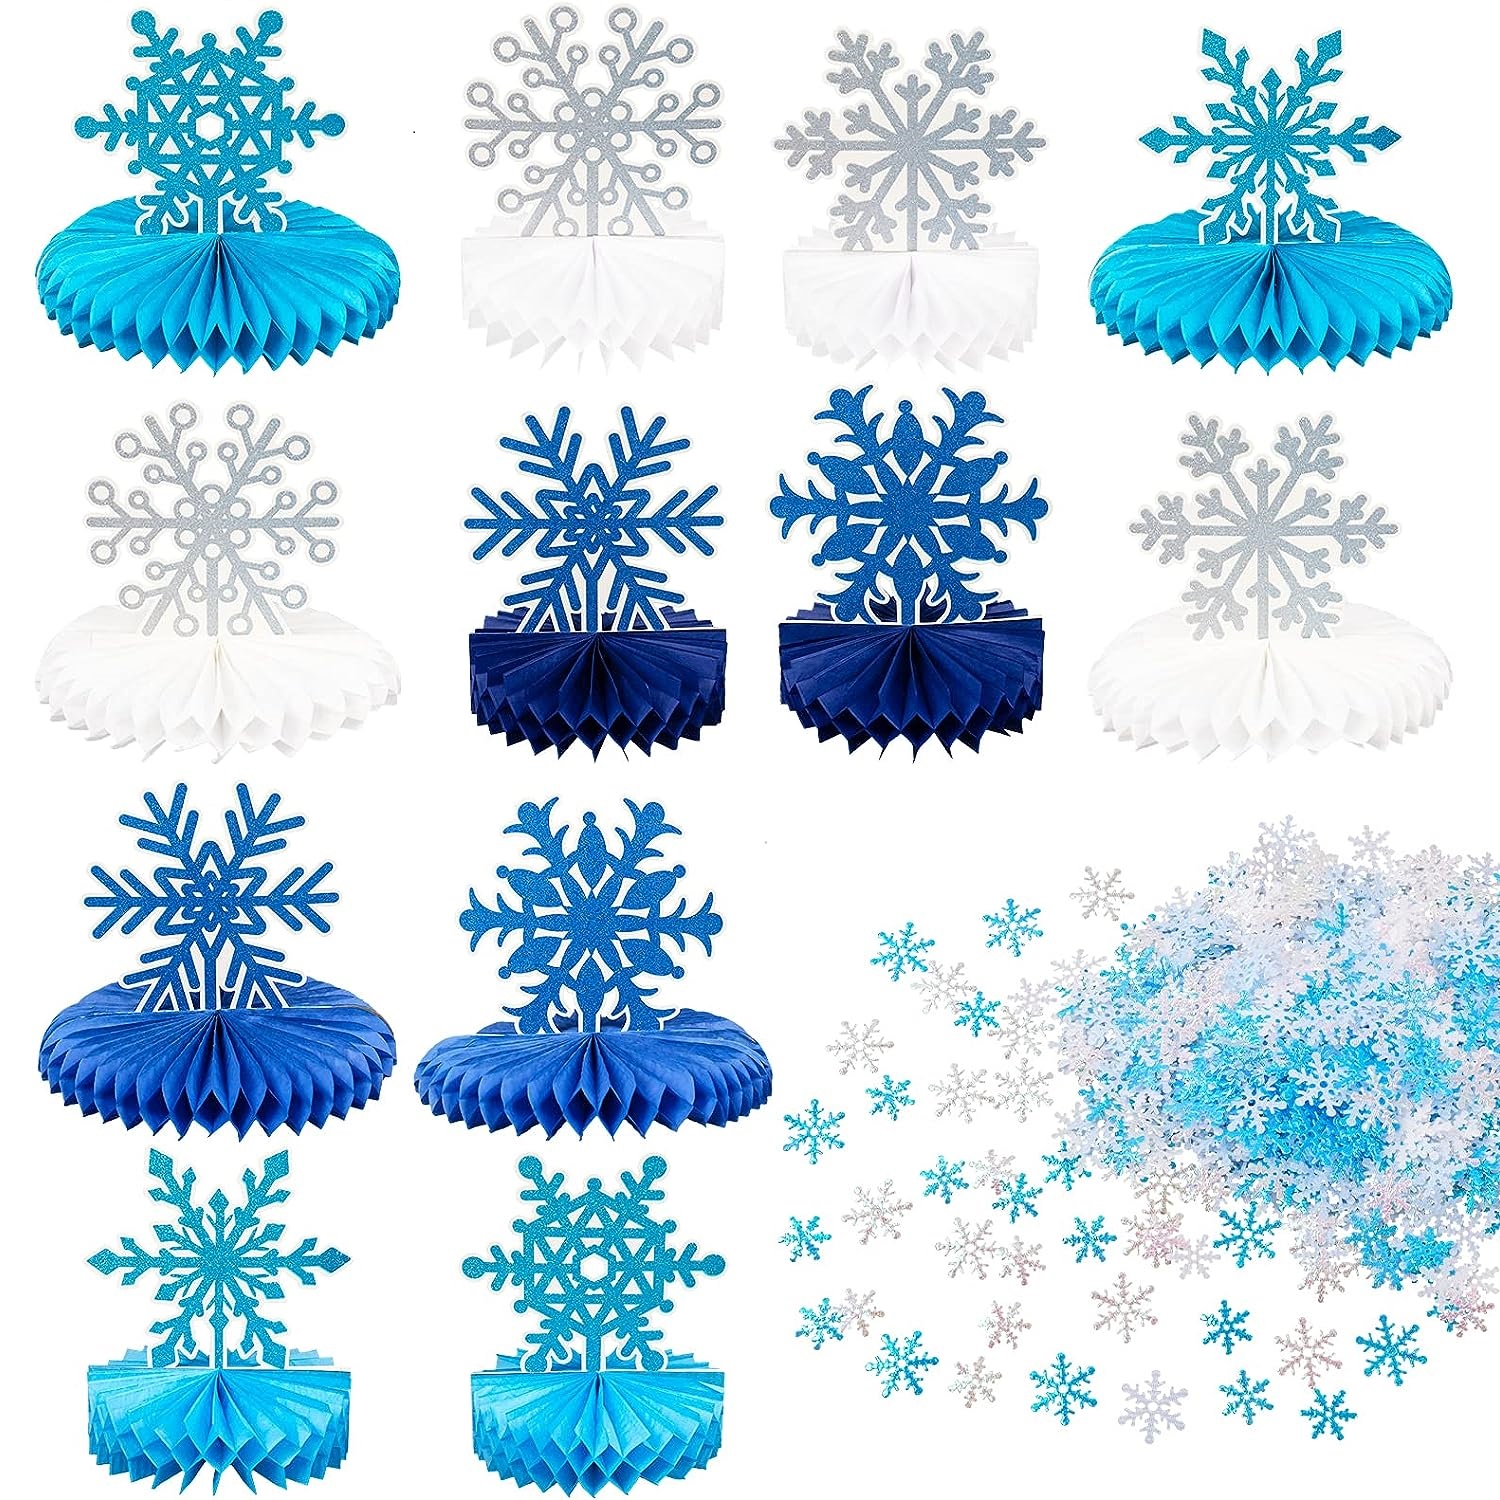 300pcs Snowflake Confetti For Winter Wonderland Decorations Snowflakes For  Crafts Snowflake Baby Shower Confetti Winter Wedding Decorations Snowflake